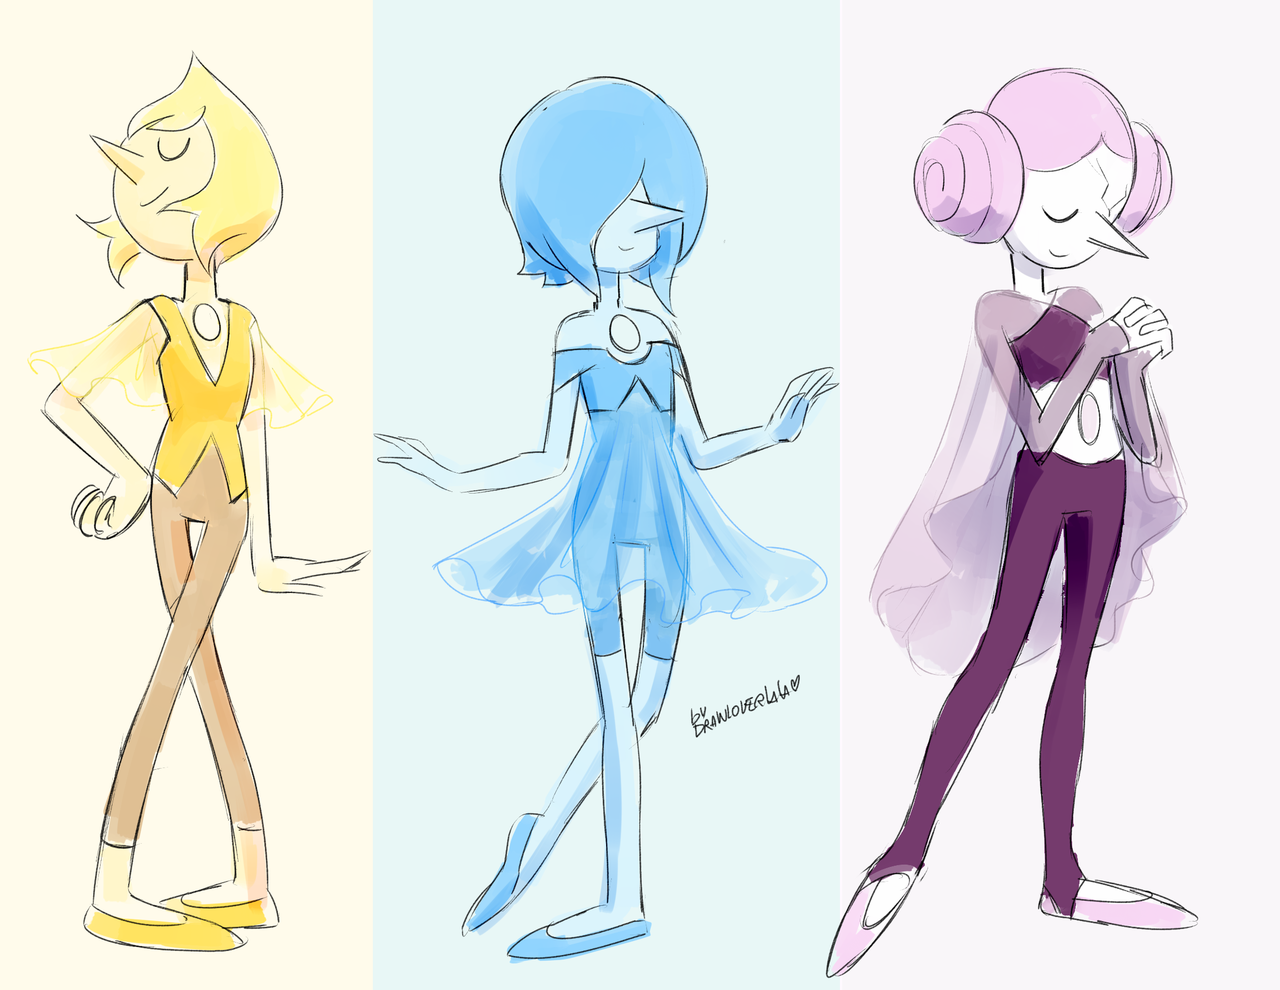 Just having fun trying to imagine that when the Pearls become free, they can choose their outfits ;u;